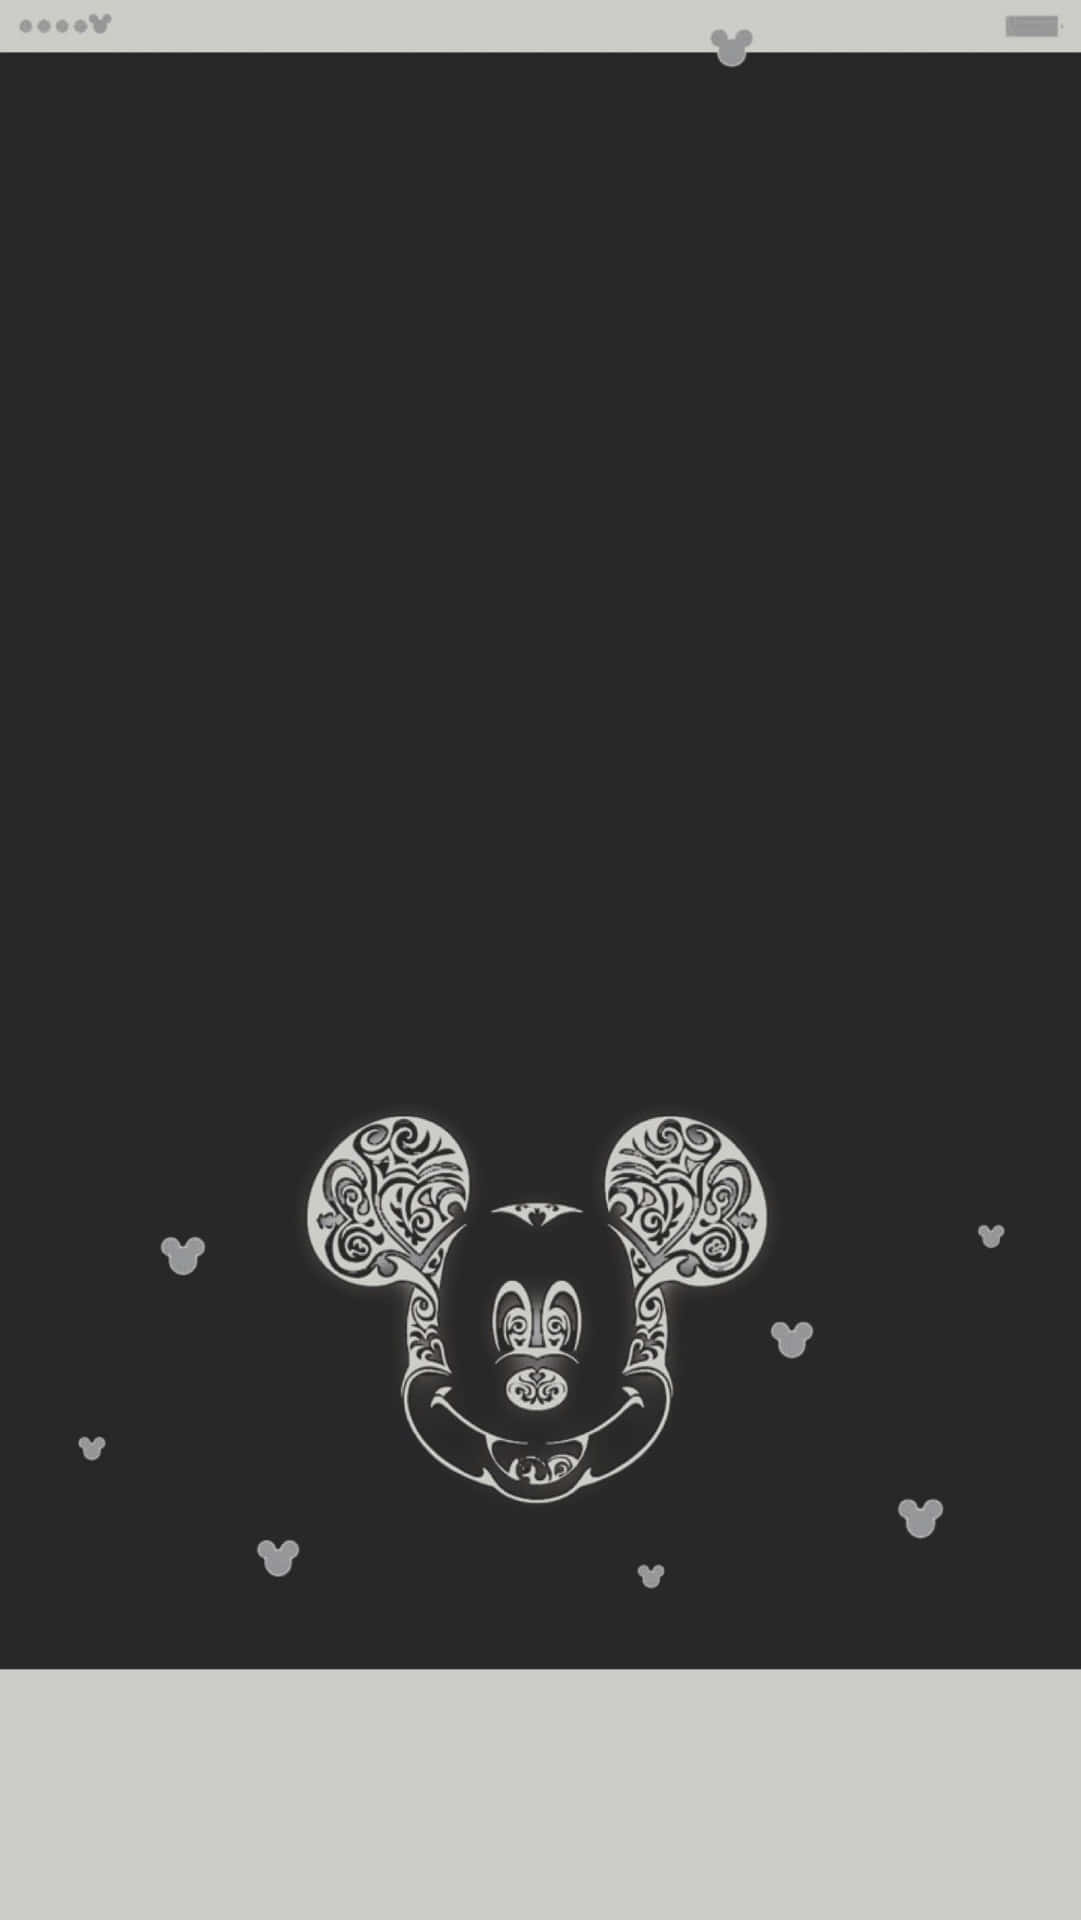 A Black And White Image Of A Mouse With Hearts Wallpaper